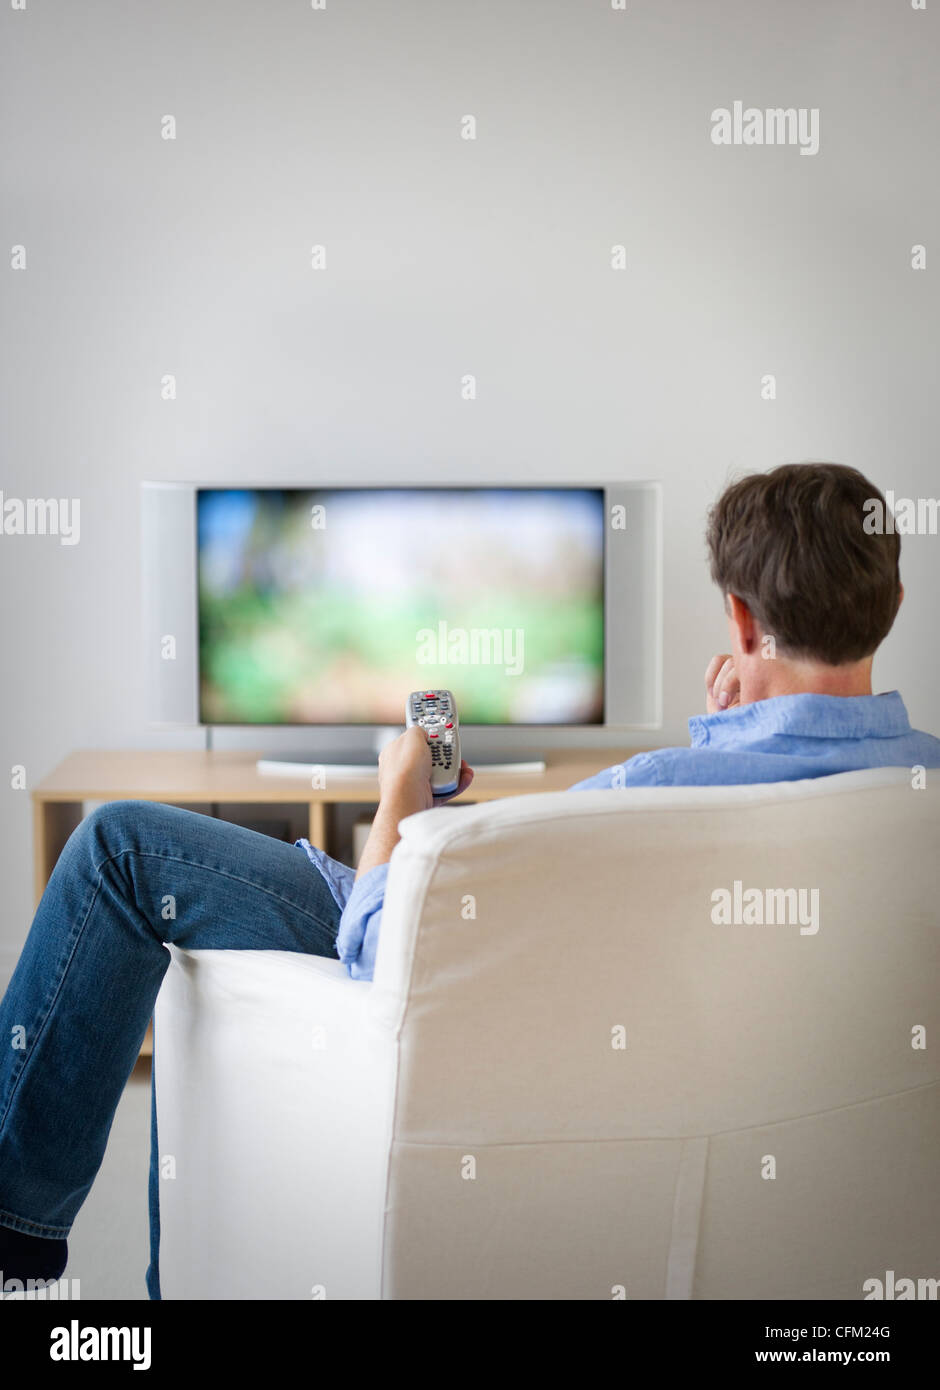 Jersey City, New Jersey, Man watching tv in living room Stock Photo